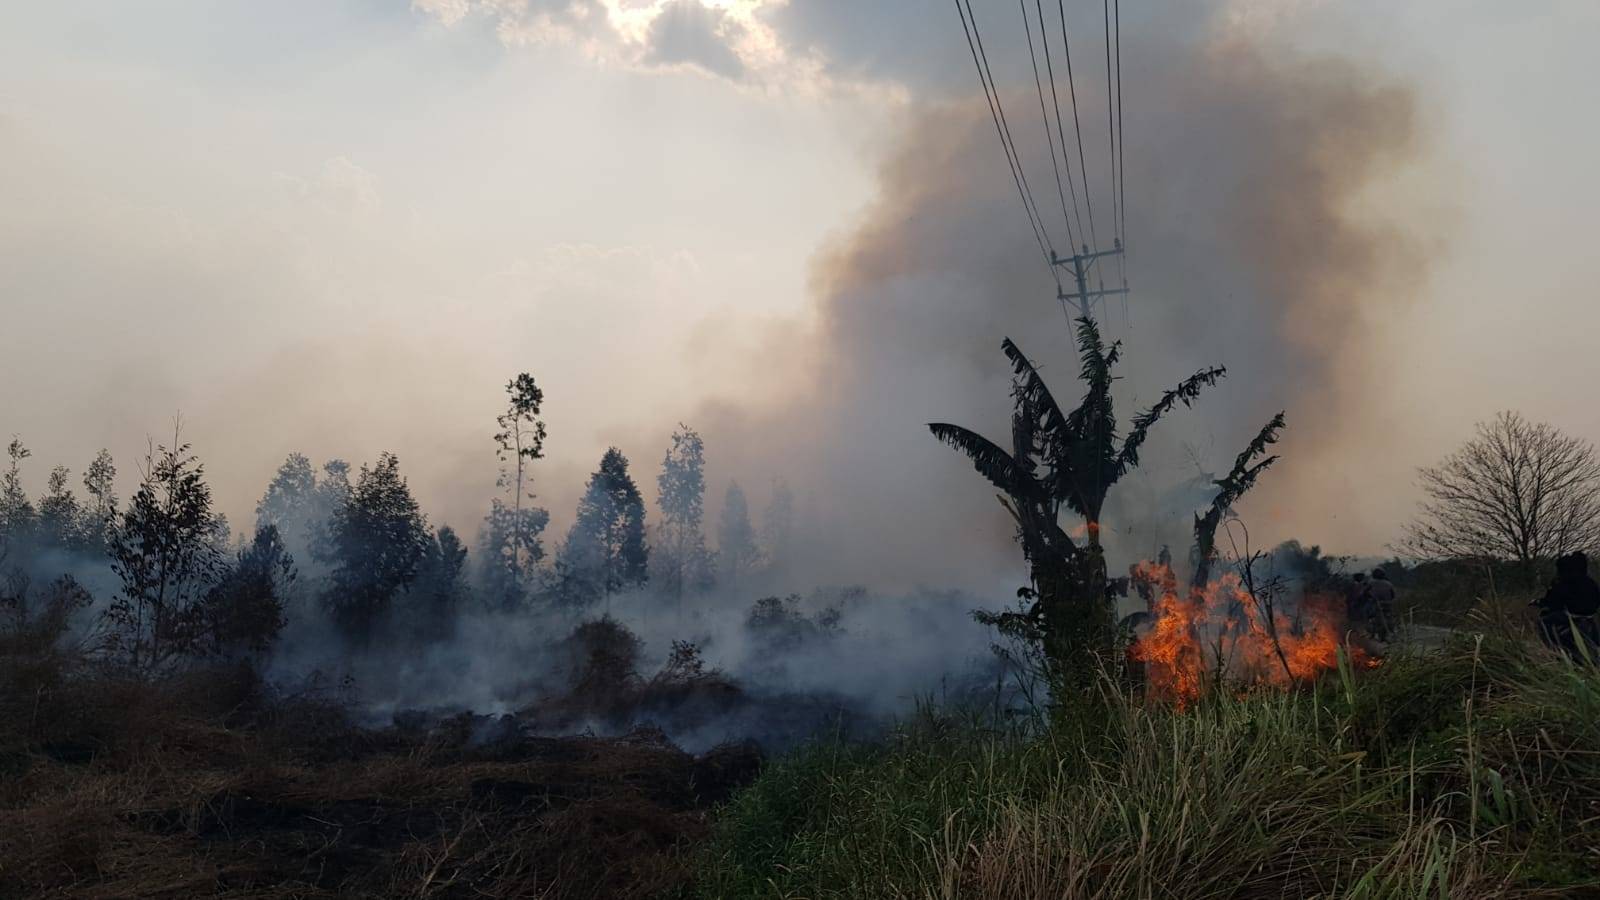 No smoke from fires crossing into neighbouring nations, Indonesia reiterates